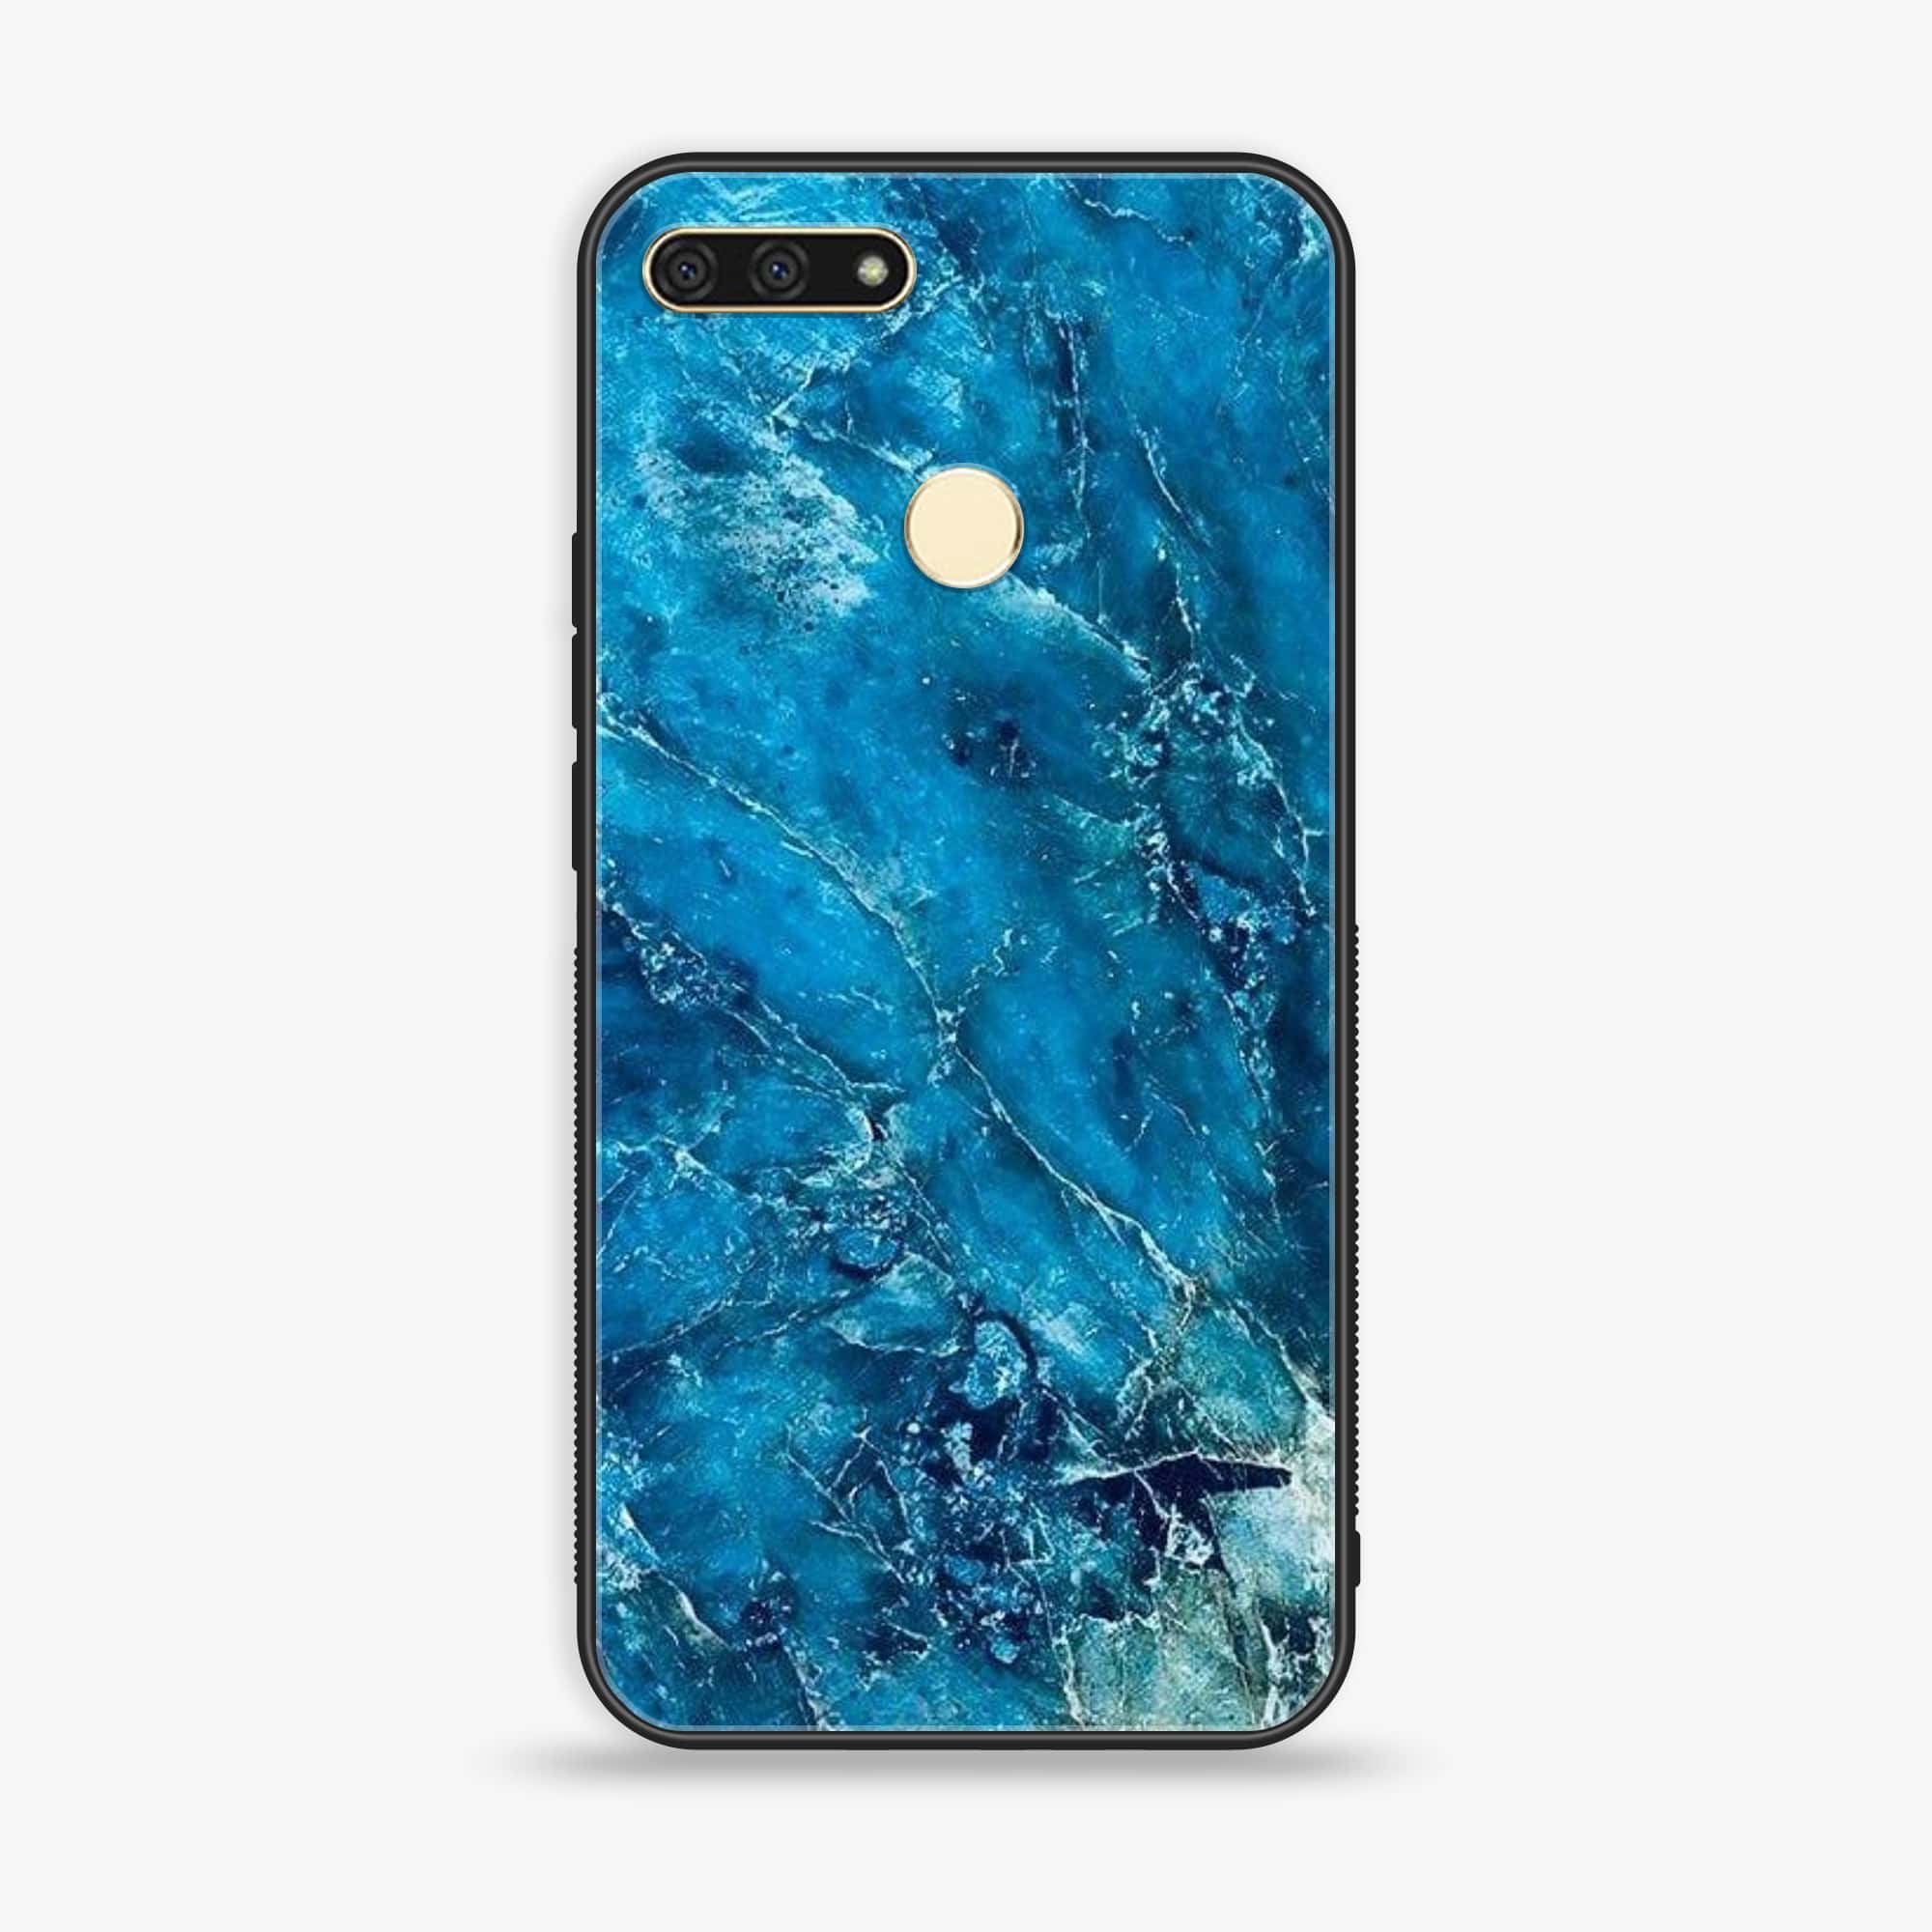 Honor 7A - Blue Marble 2.0 Series - Premium Printed Glass soft Bumper shock Proof Case